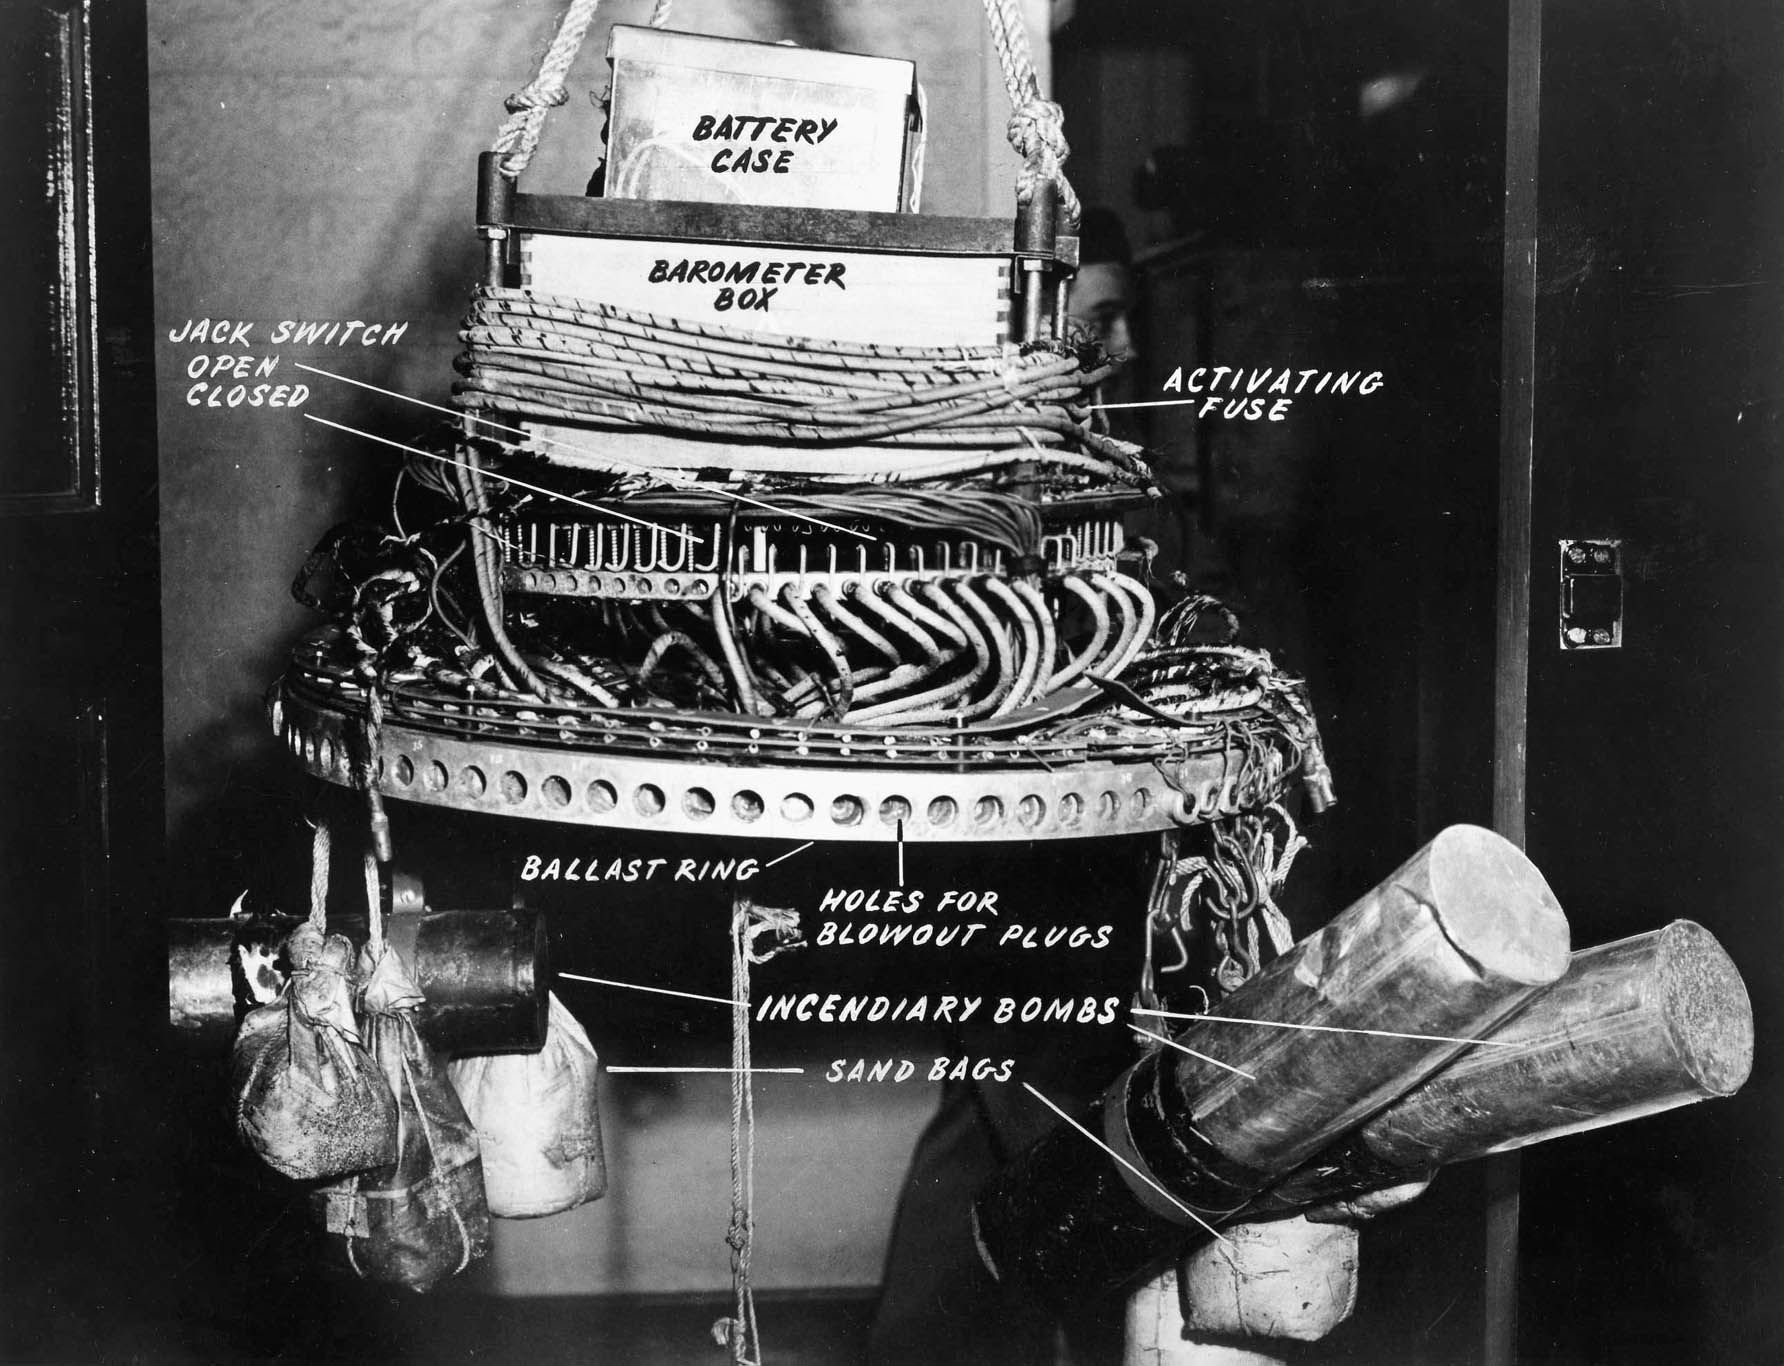 “Brain center” of a Japanese balloon bomb. The automatic altitude control device allowed the balloon to travel at 30,000 feet during the 3-to-4-day trip to the United States.